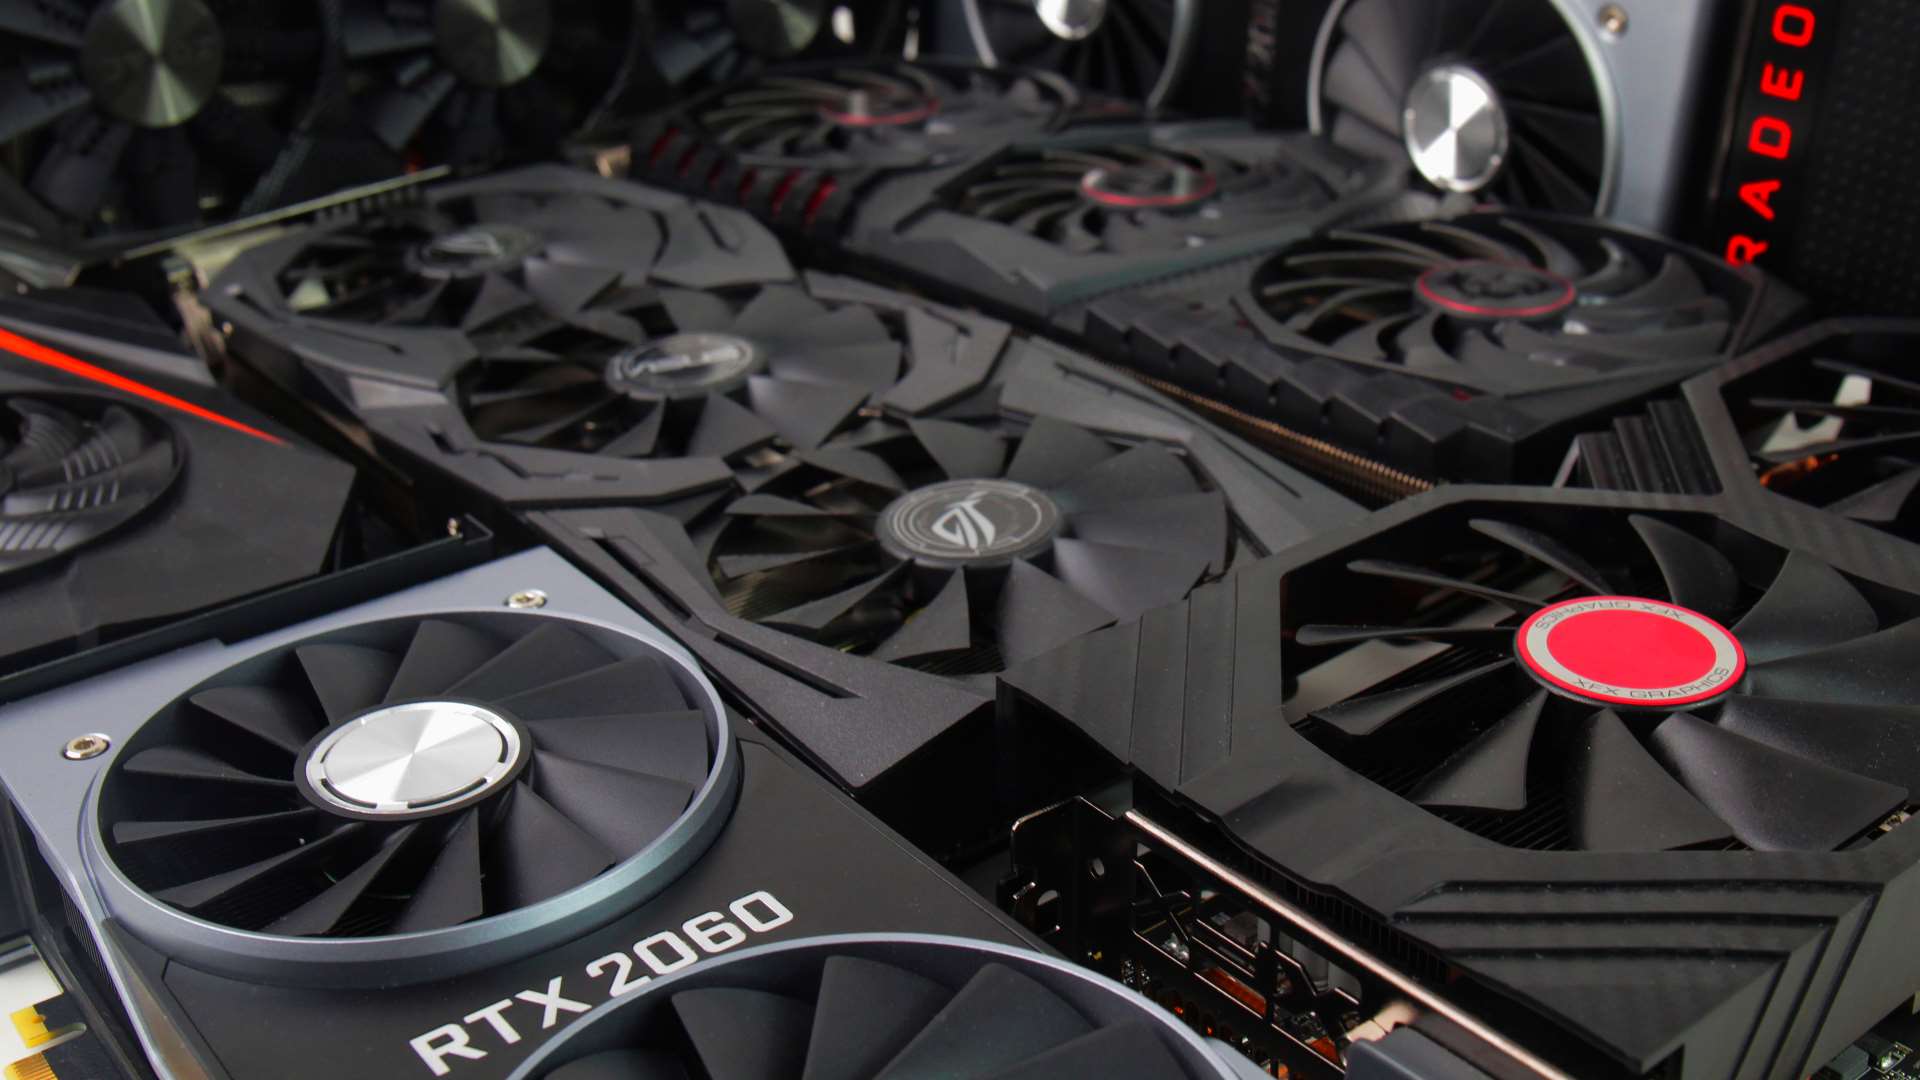 Best Graphics Card What Is The Top Graphics Card For Gaming